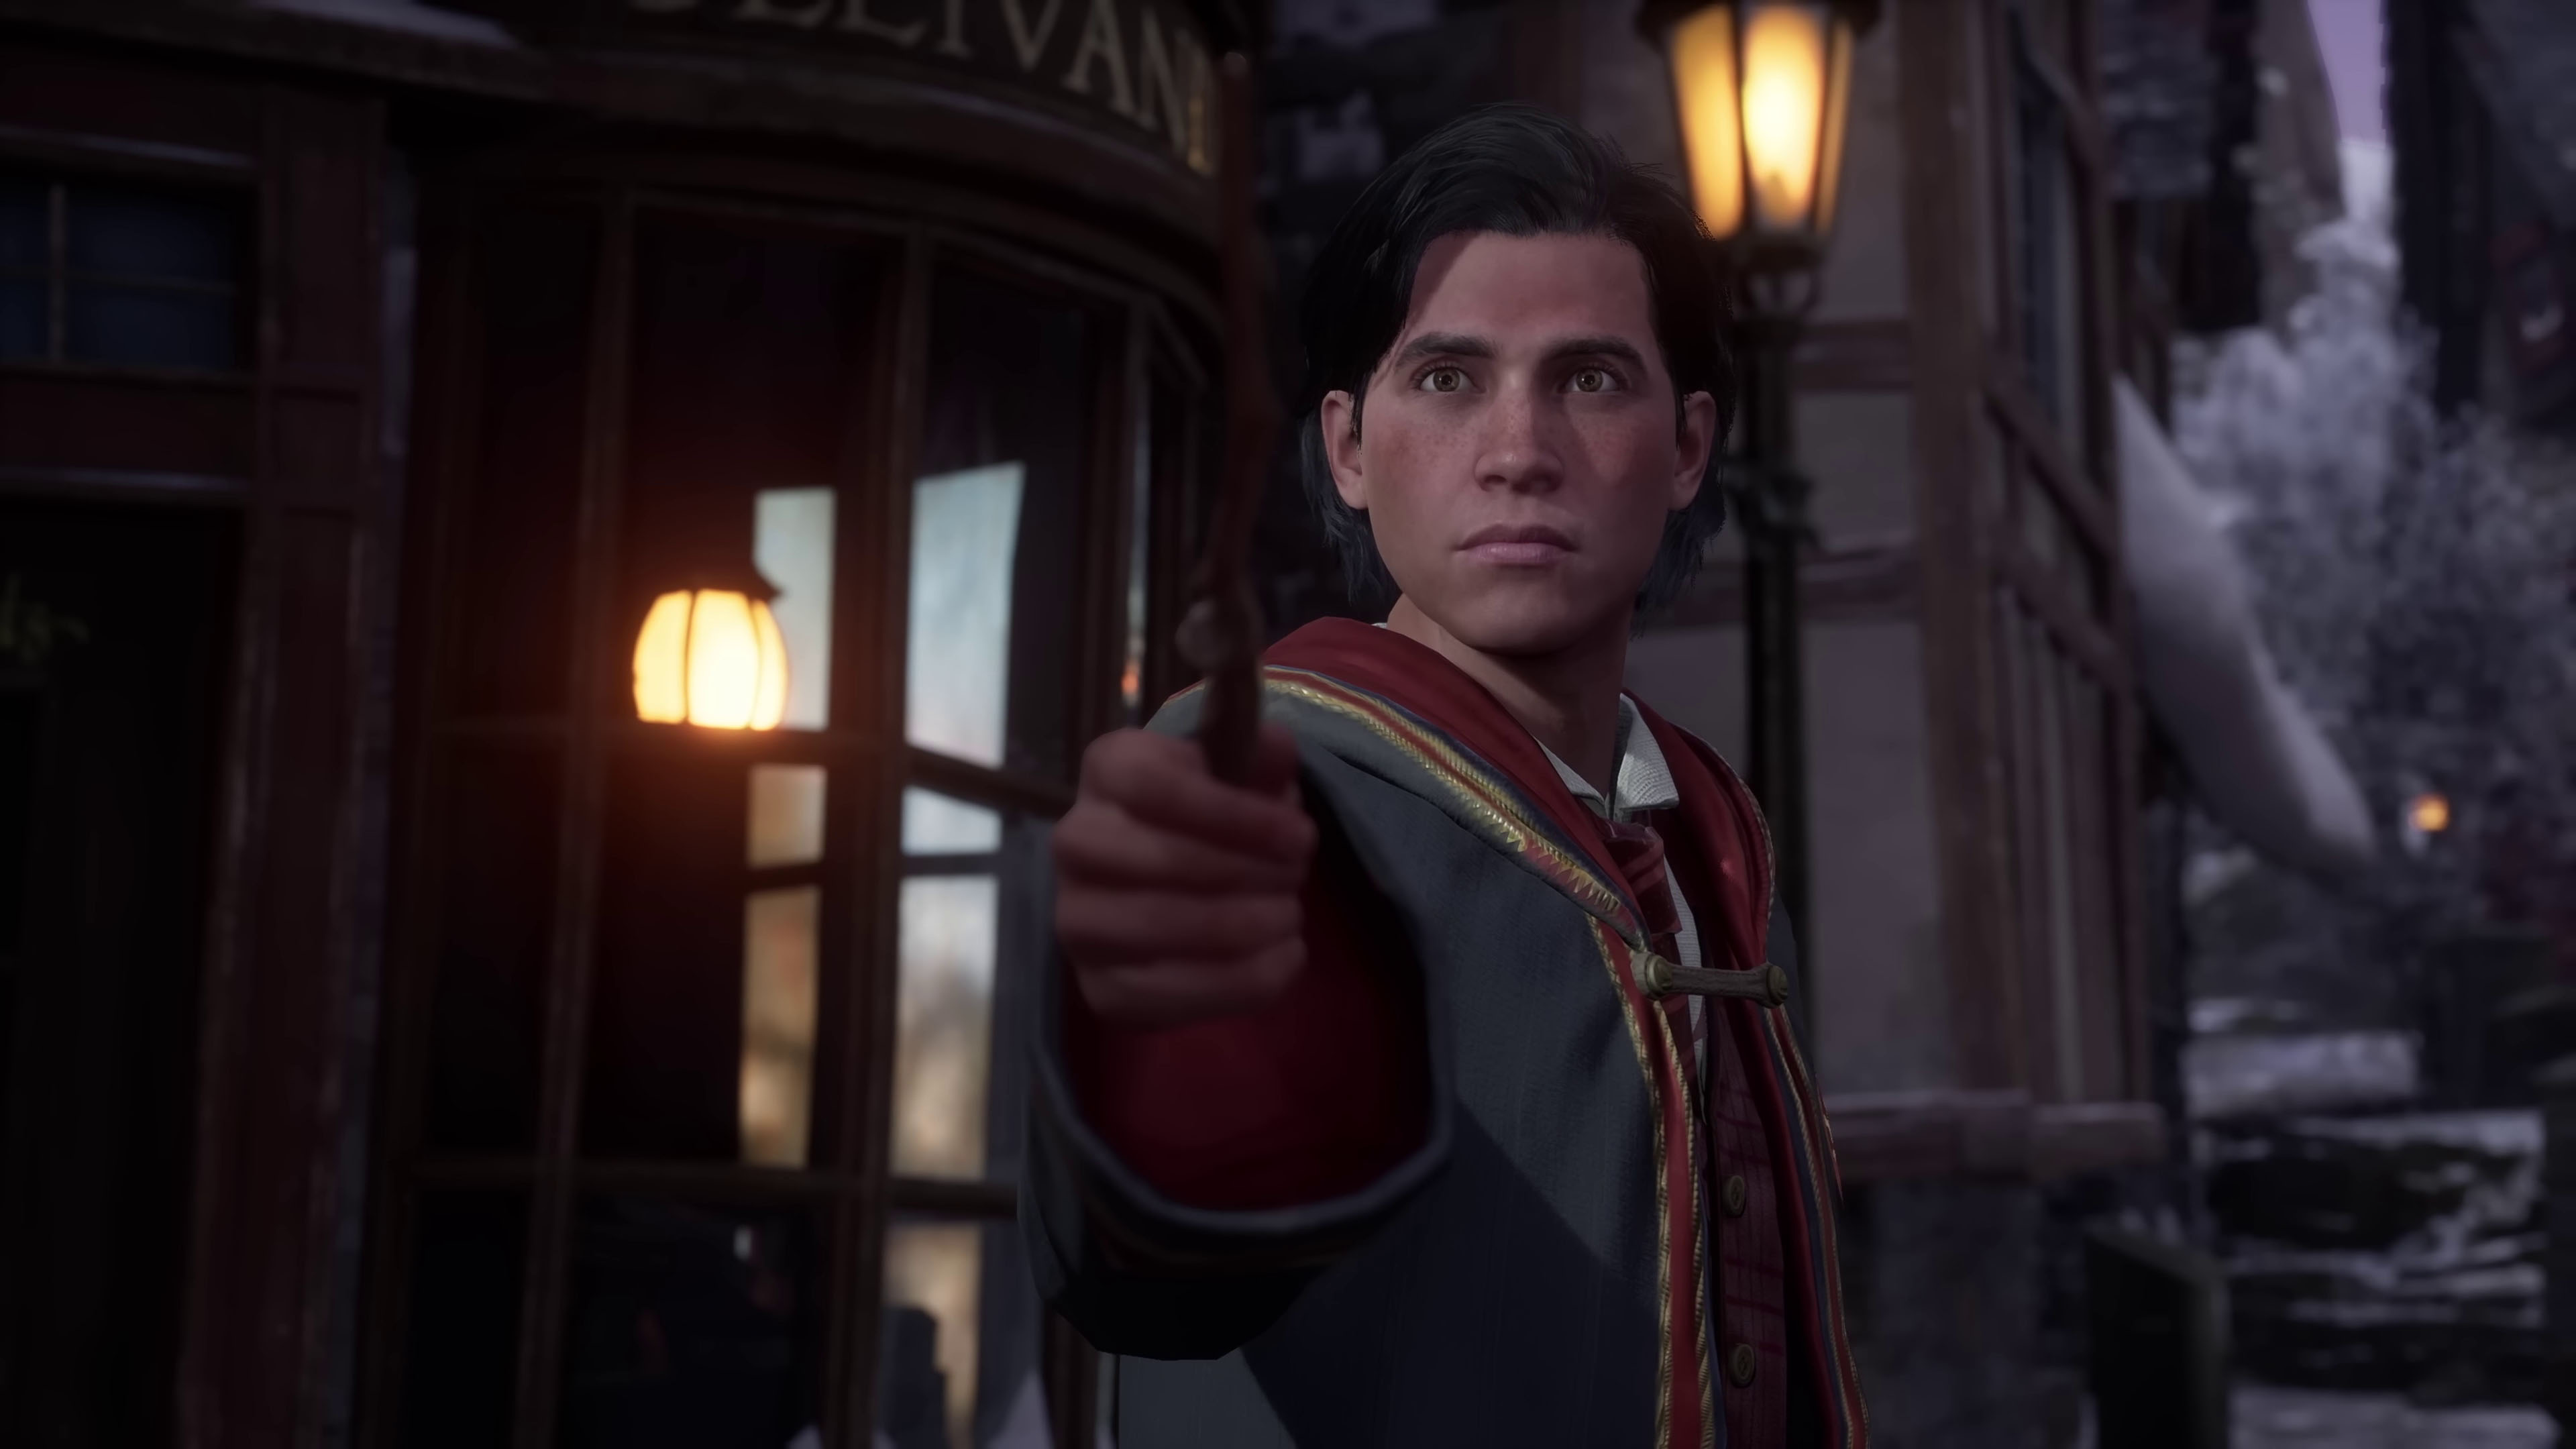 Harry Potter Prequel Game 'Hogwarts Legacy' Trailer Is All About Dark Magic  - CNET